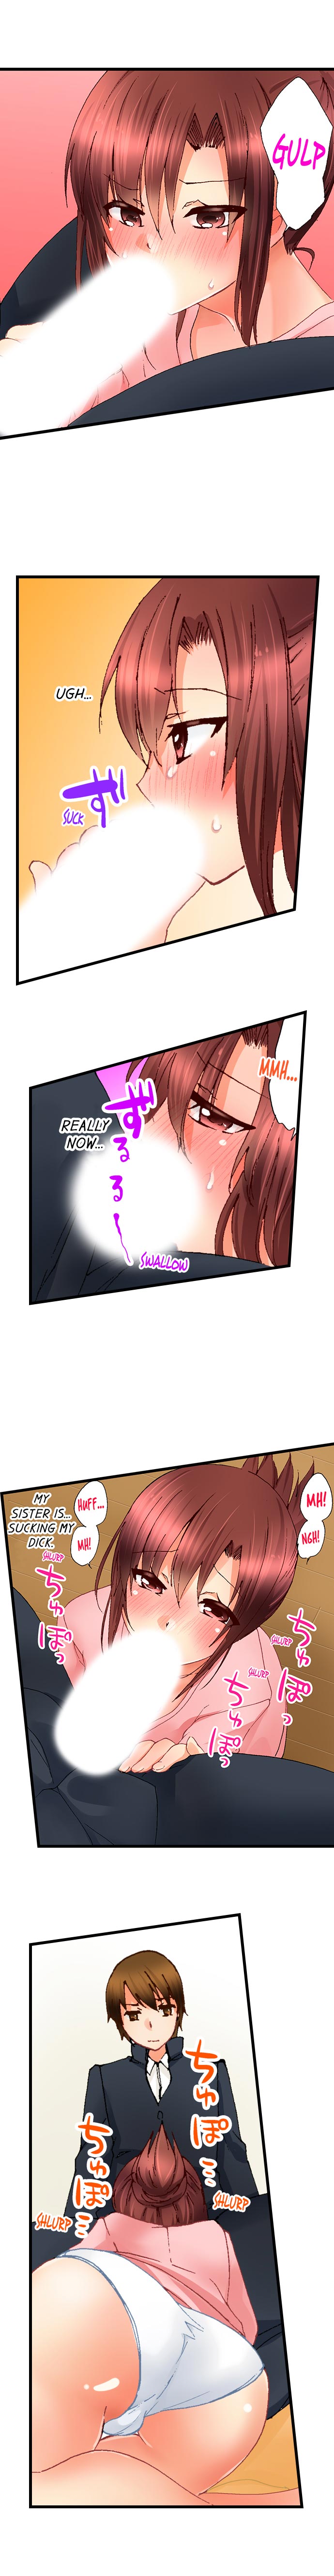 Touching My Older Sister Under the Table - Chapter 3 Page 7